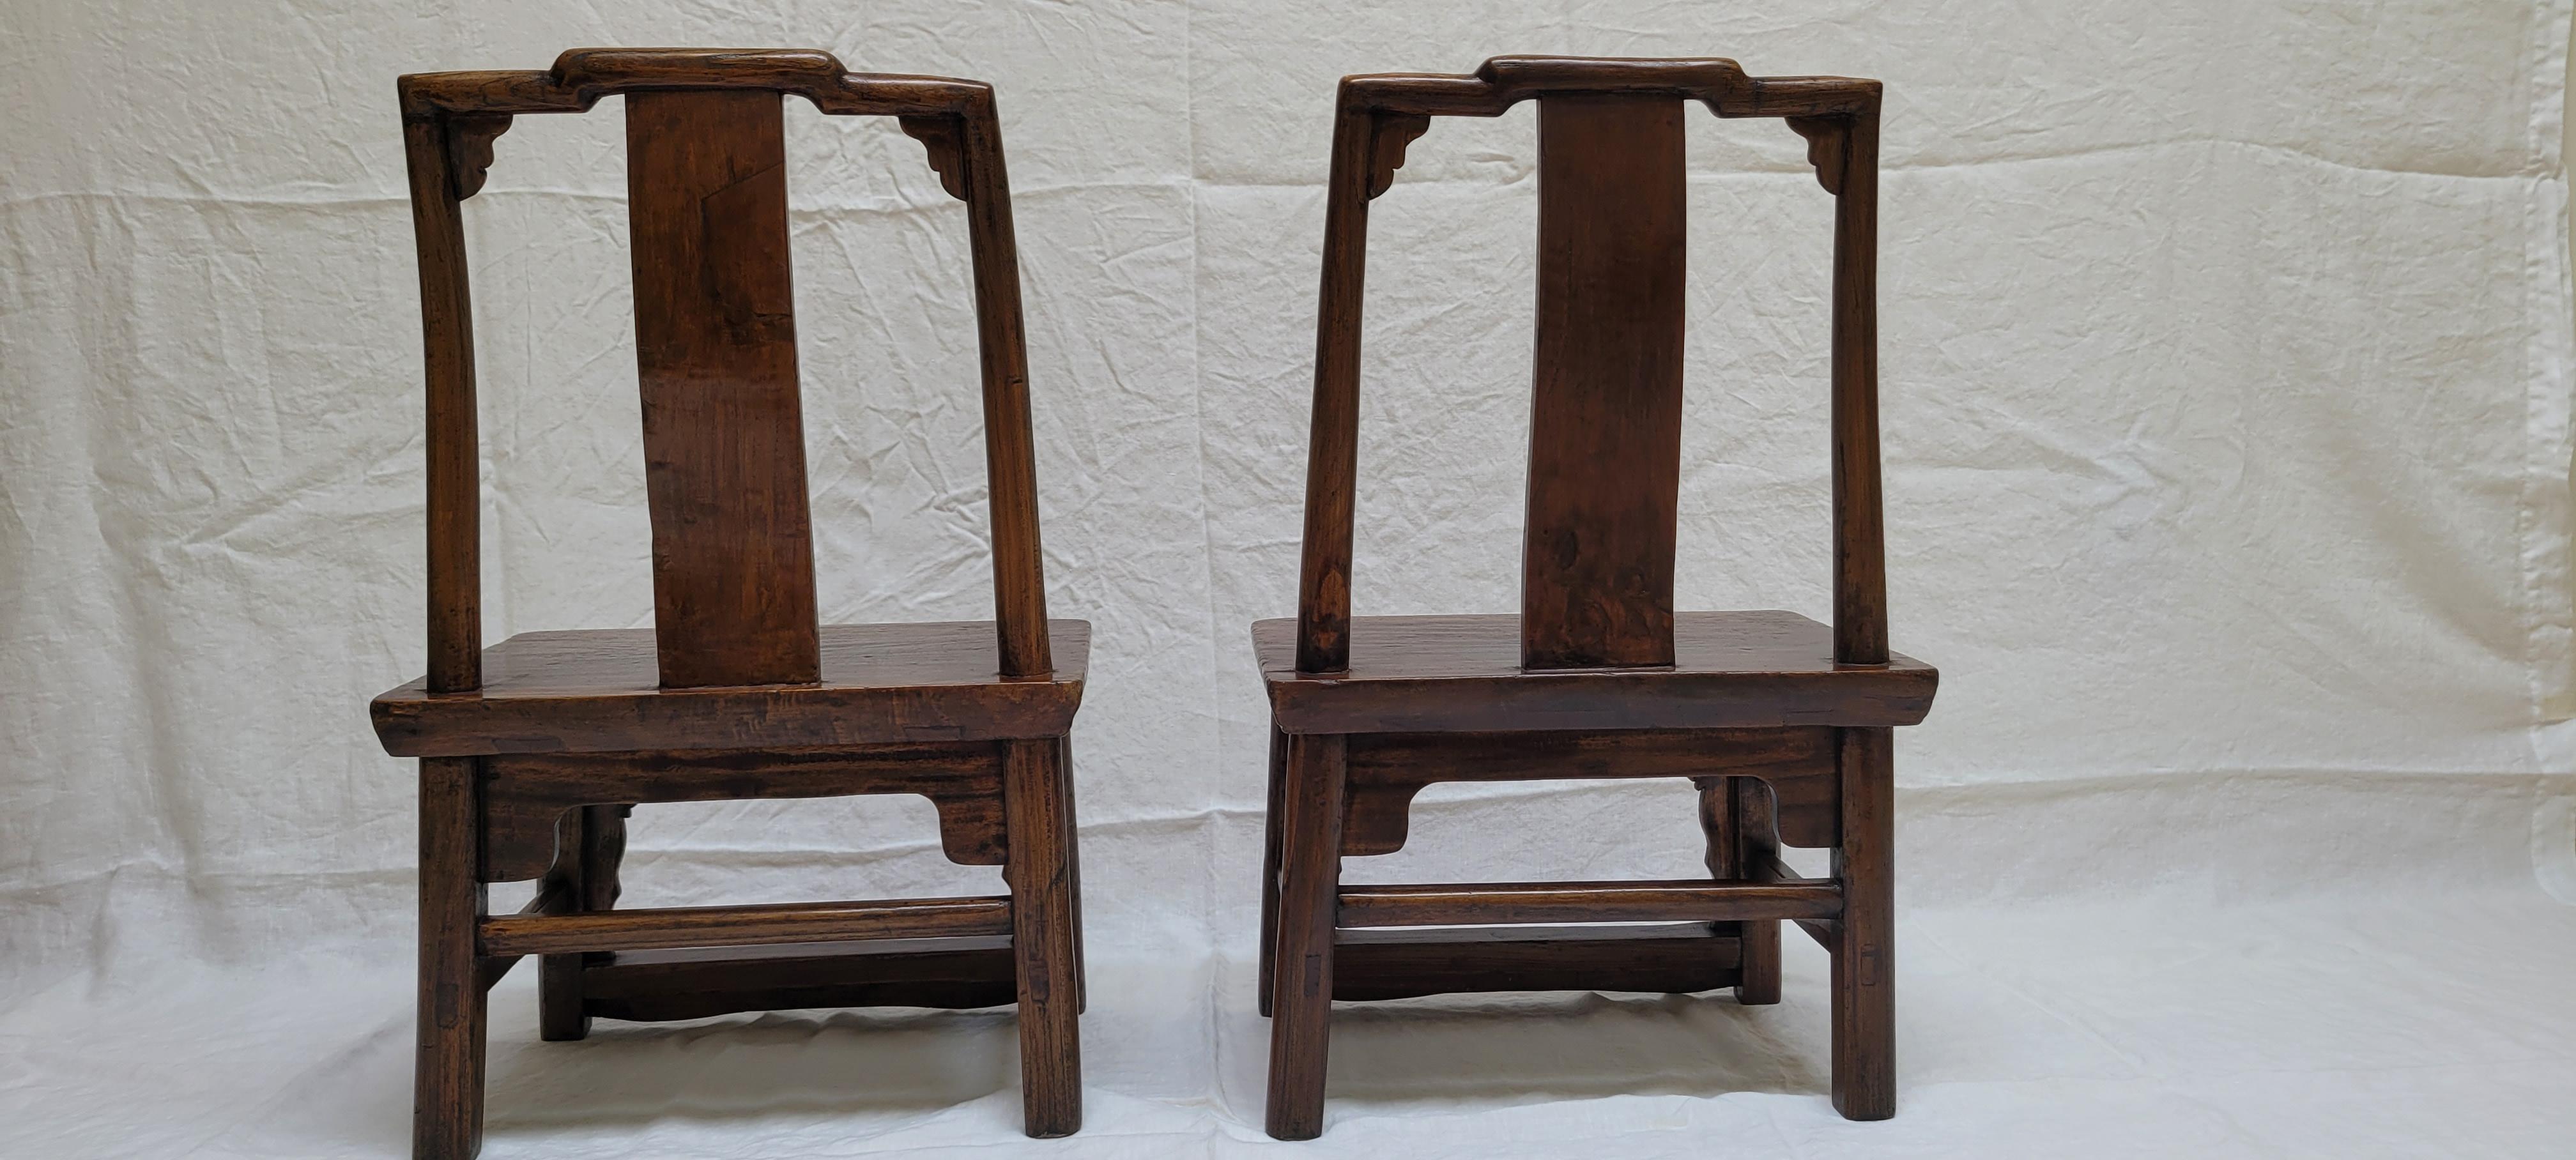 Hardwood 19th Century Pair of Children's Chairs For Sale